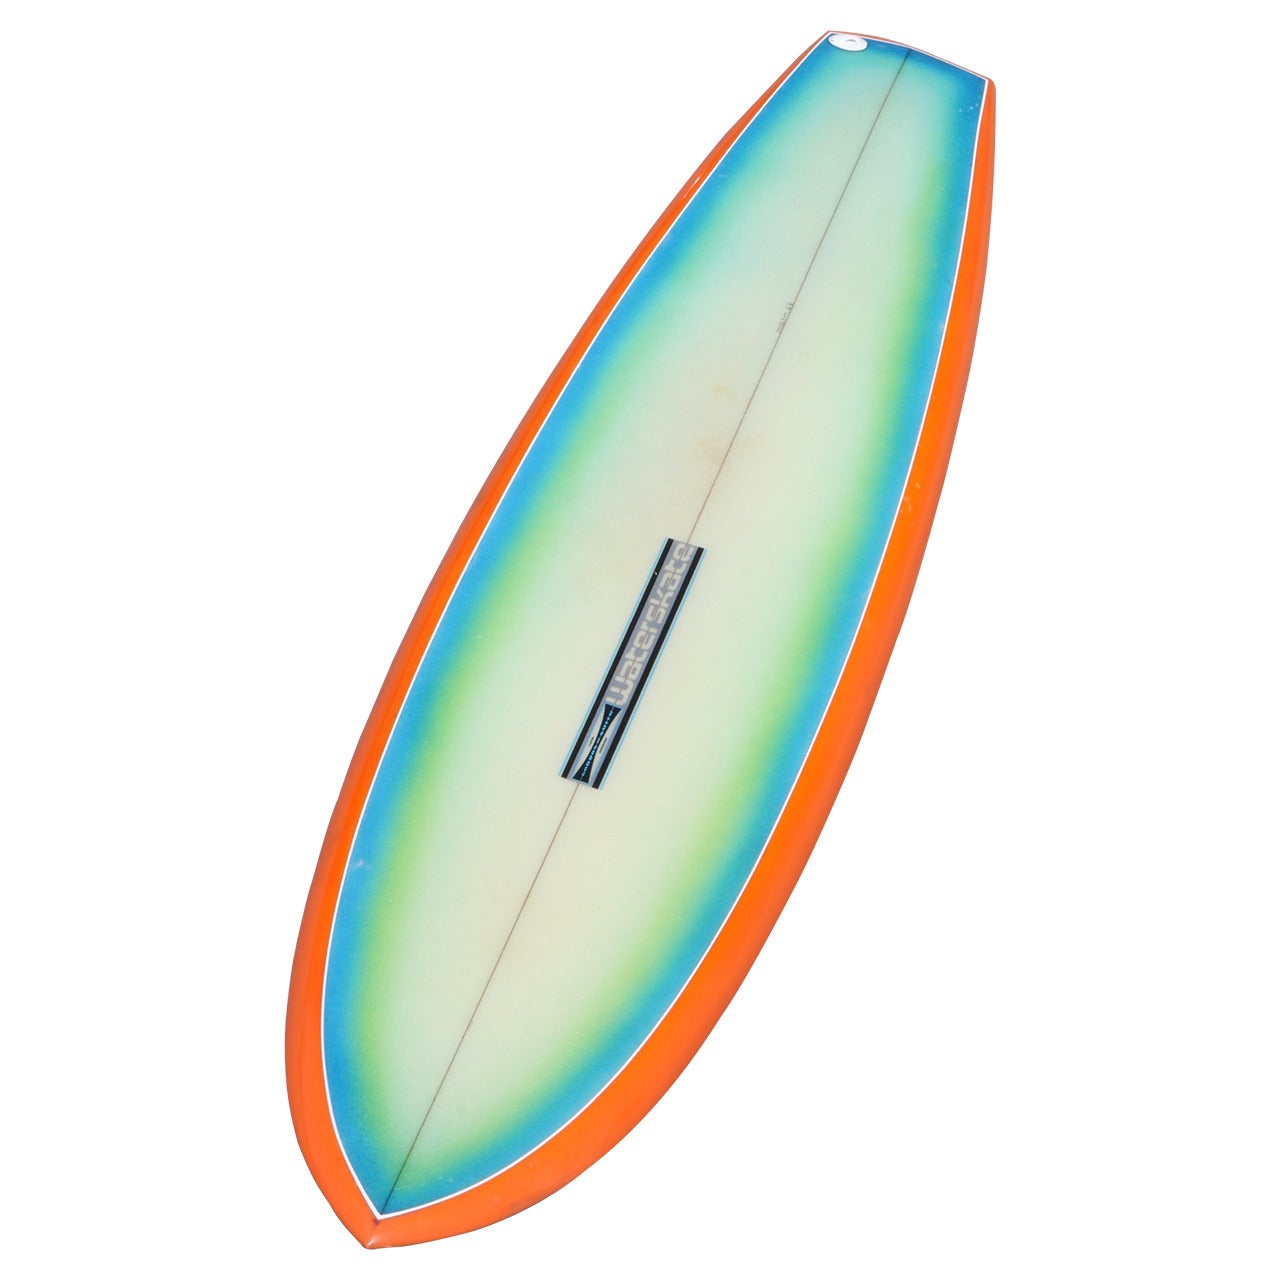 Super Rare 1971 Gordon and Smith Concave Waterskate Model Surfboard For Sale